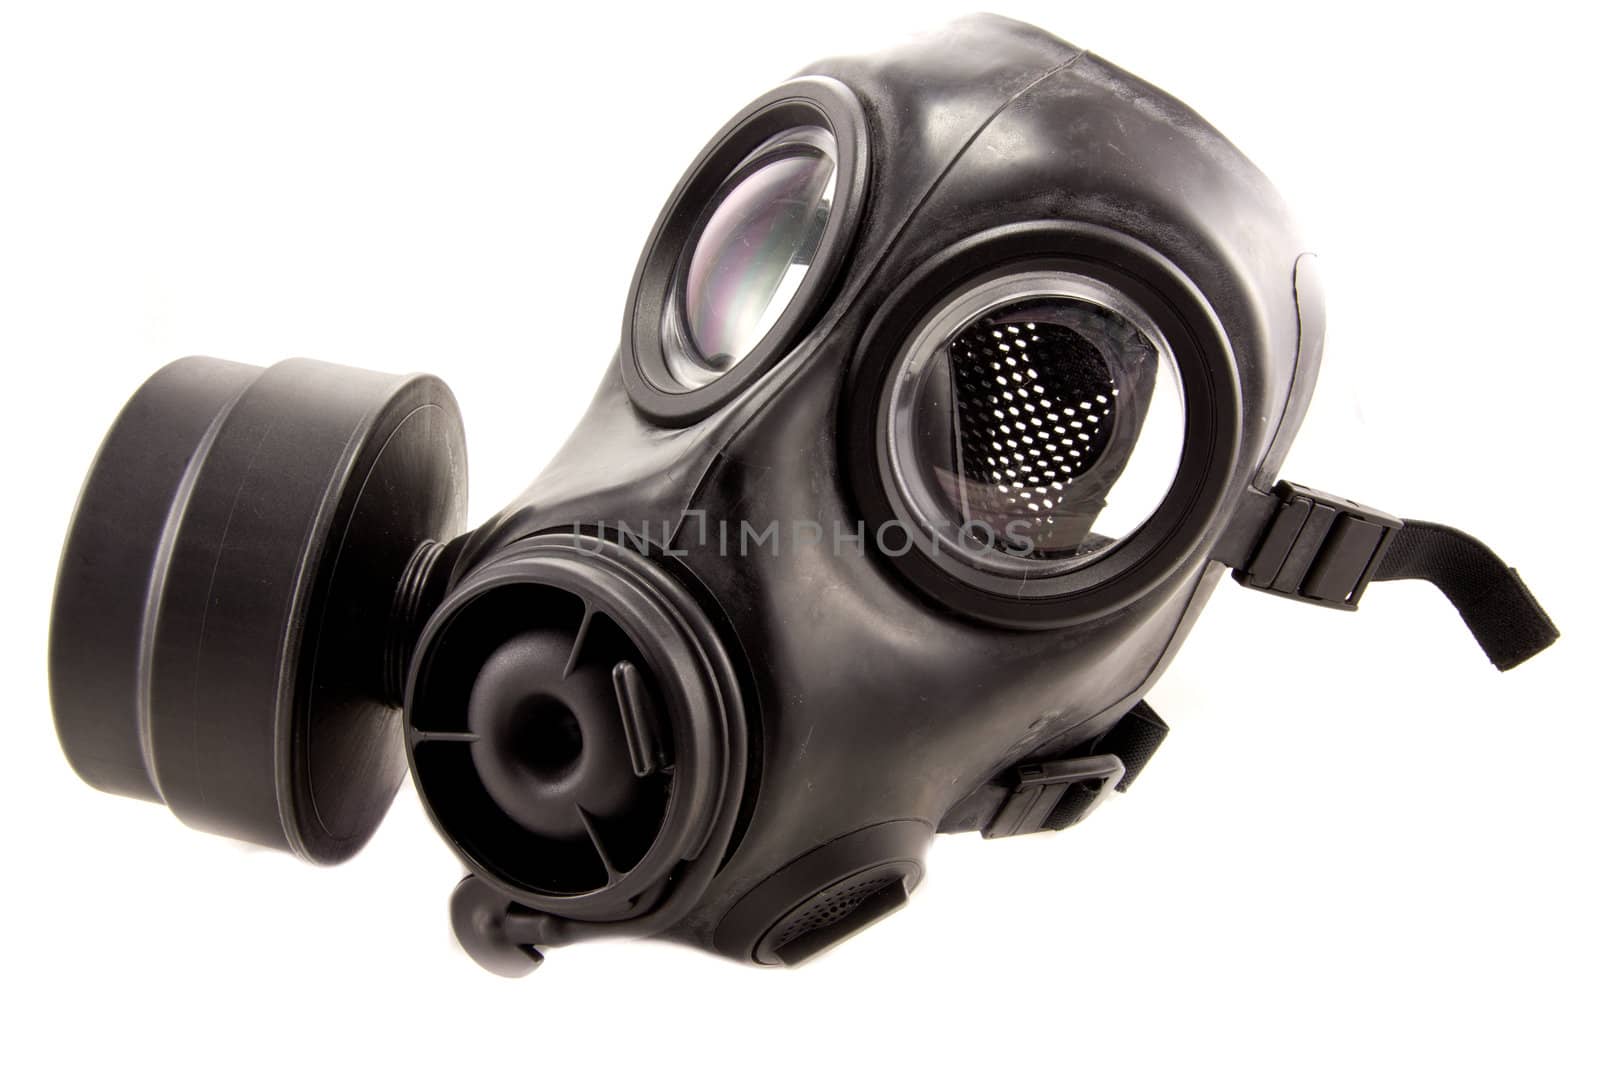 Picture of a rubber gasmask used to protect.